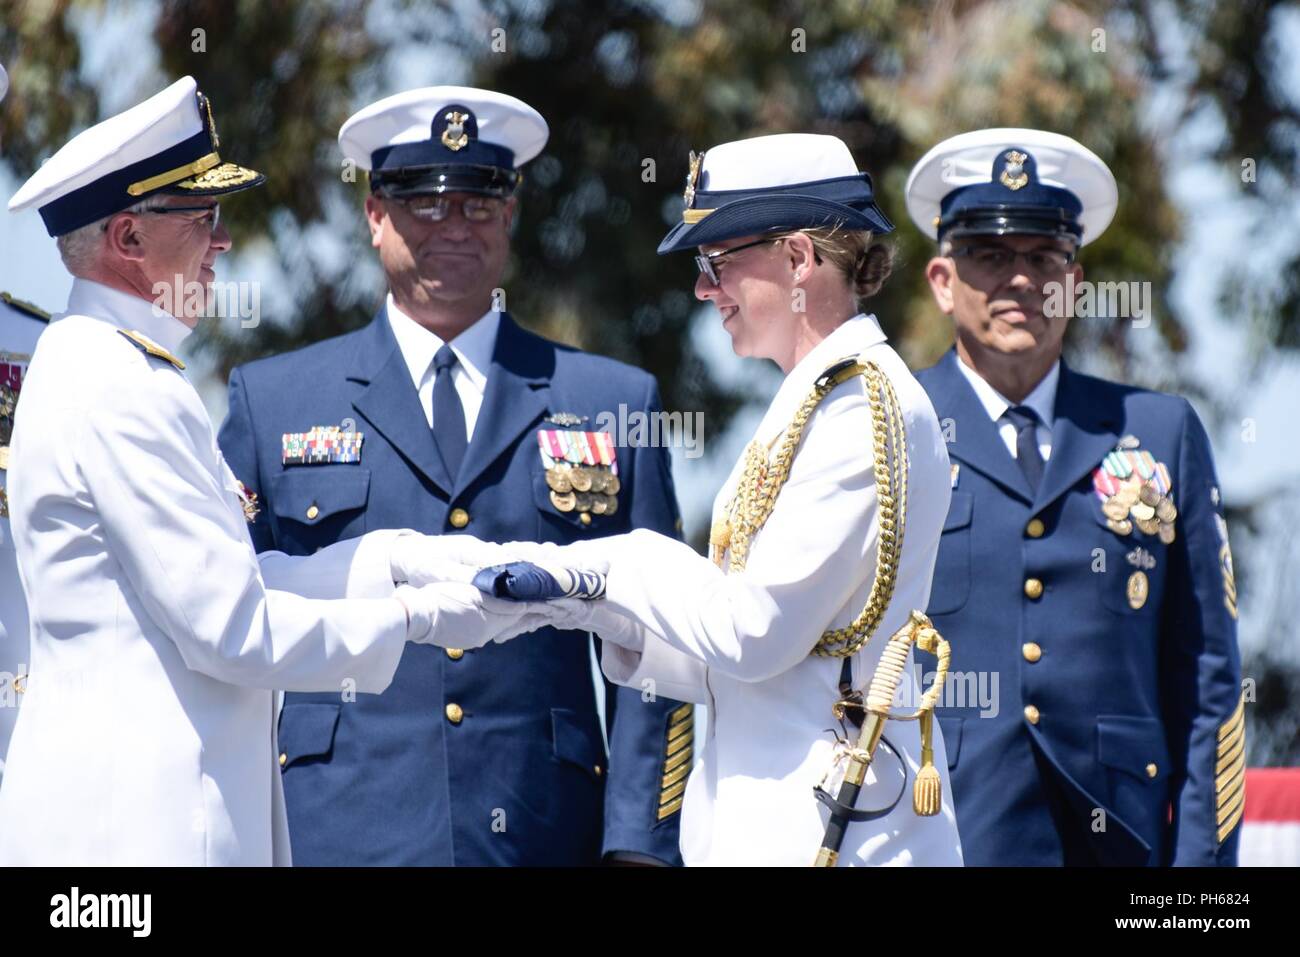 Rear Admiral Todd Sokalzuk, the Coast Guard’s 11th District commander, hands his personal flag to his aide, Lt. Julia Kane, during his change-of-command ceremony at Coast Guard Island in Alameda, California, June 28, 2018, as the active-duty and reserve command master chiefs look on. During the ceremony, Rear Admiral Peter Gautier replaced Sokalzuk as the district commander as Sokalzuk heads to the east coast to be the deputy commander of Coast Guard Atlantic Area. Stock Photo